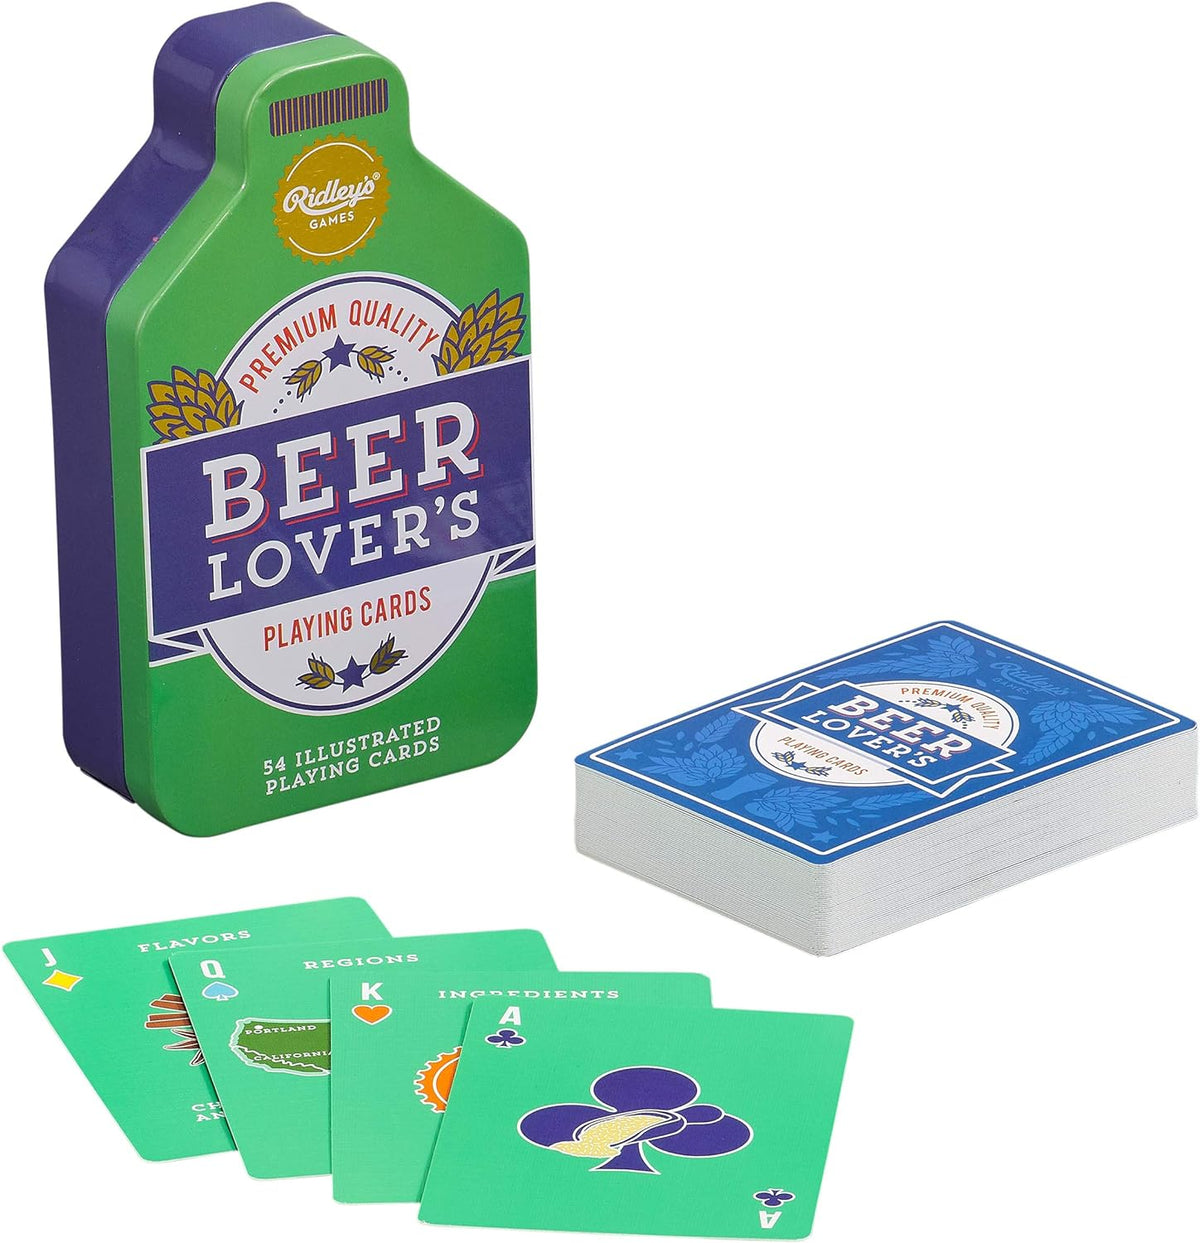 Ridley’s Beer Lover’s Deck of Index Playing Cards